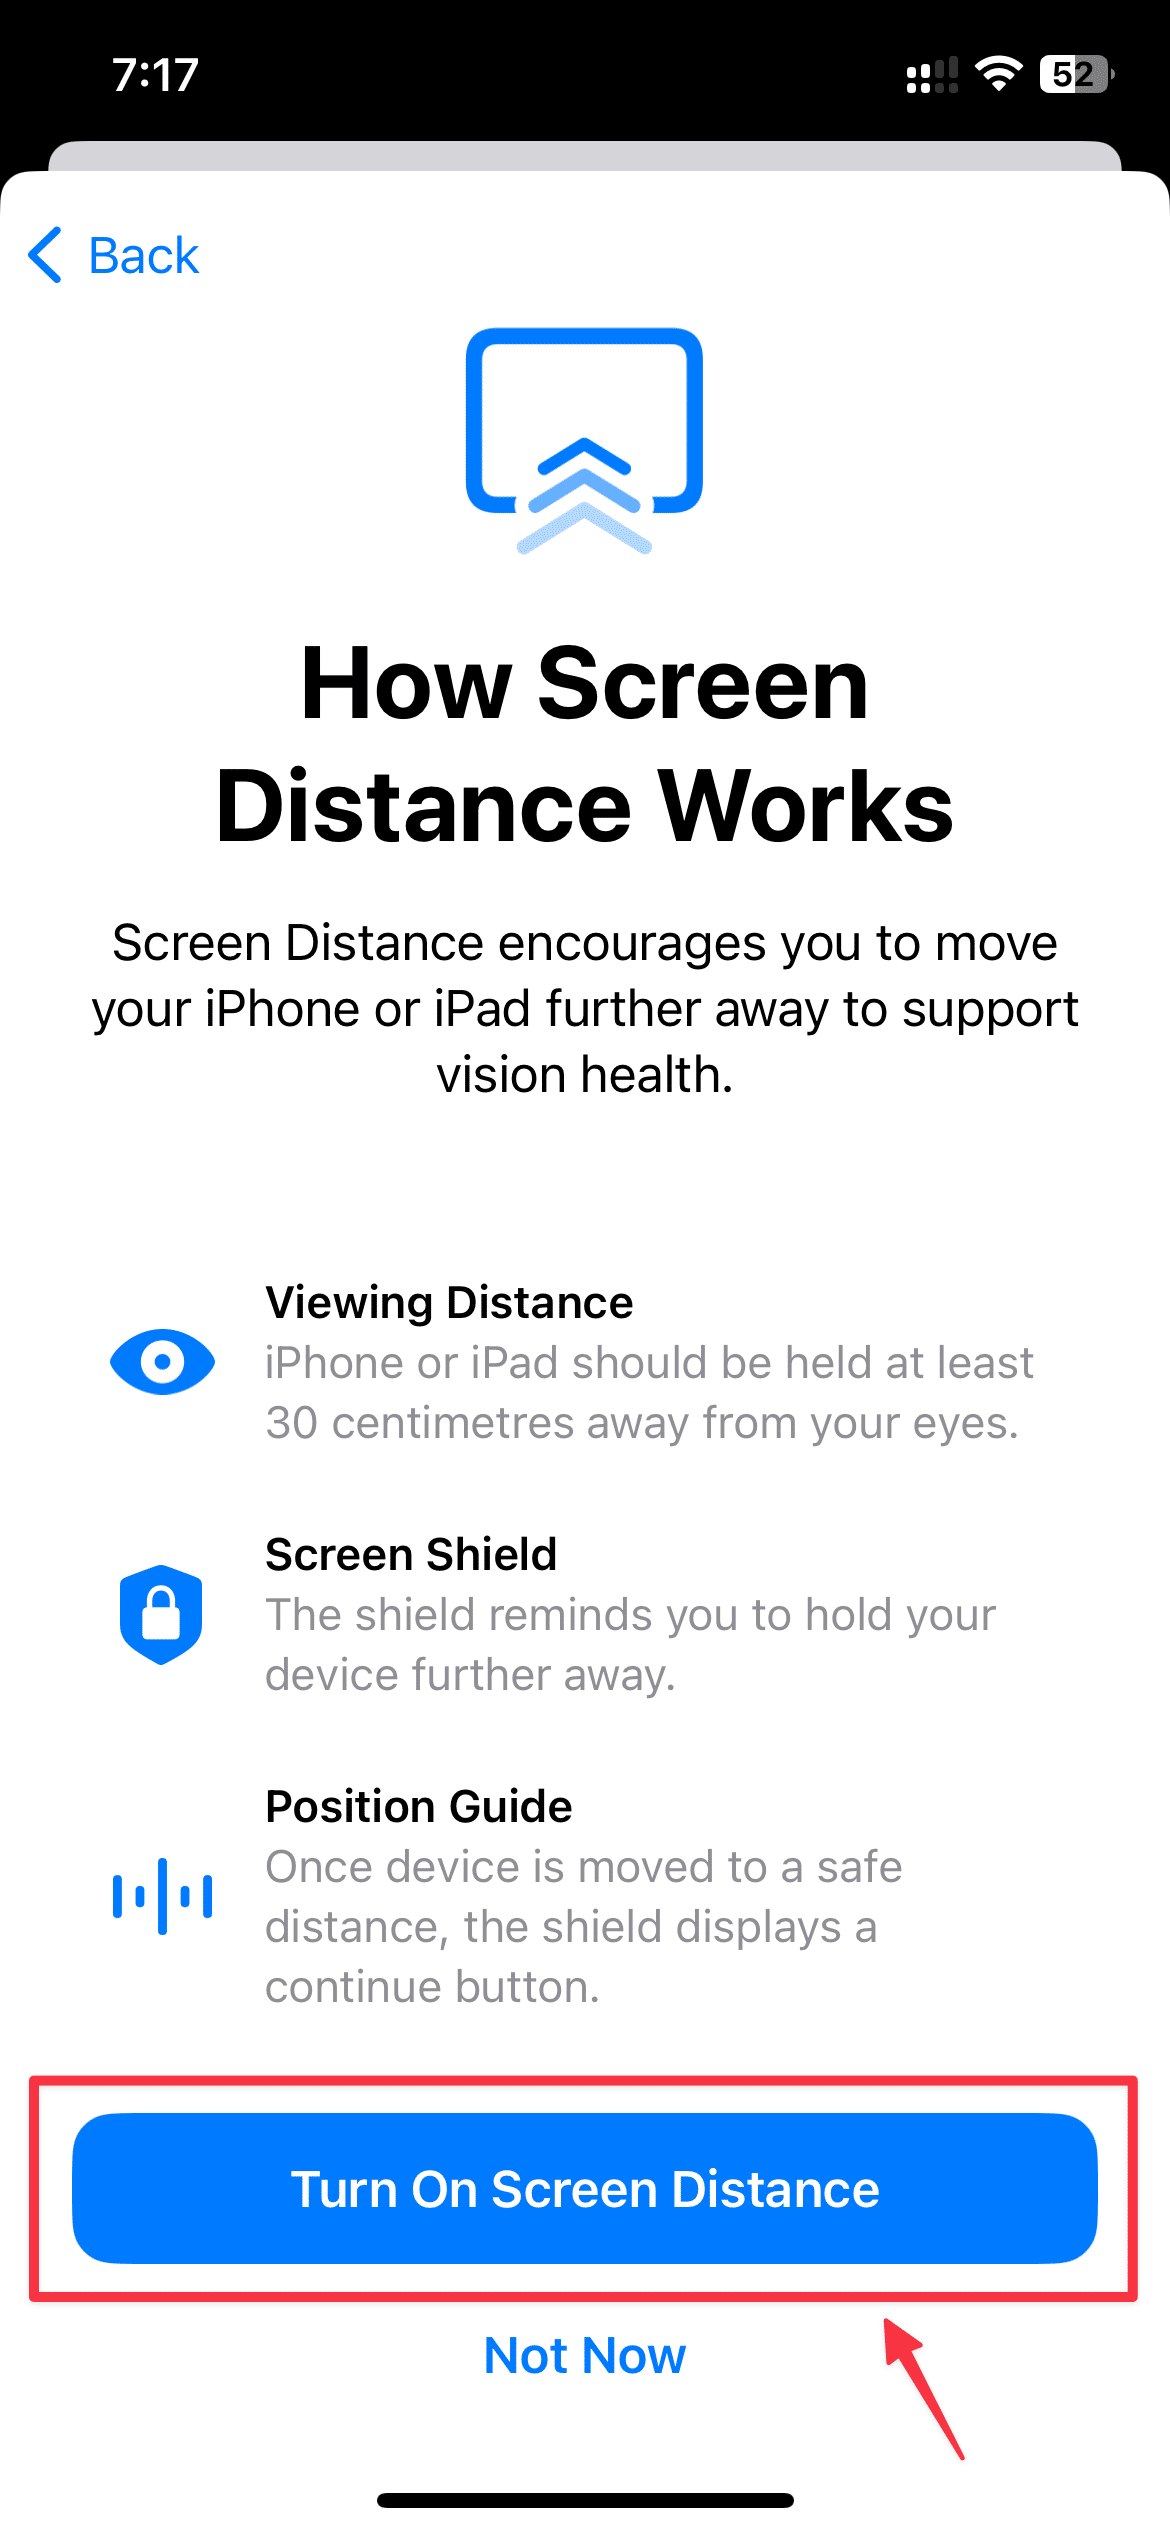 Tap Turn On Screen Distance option